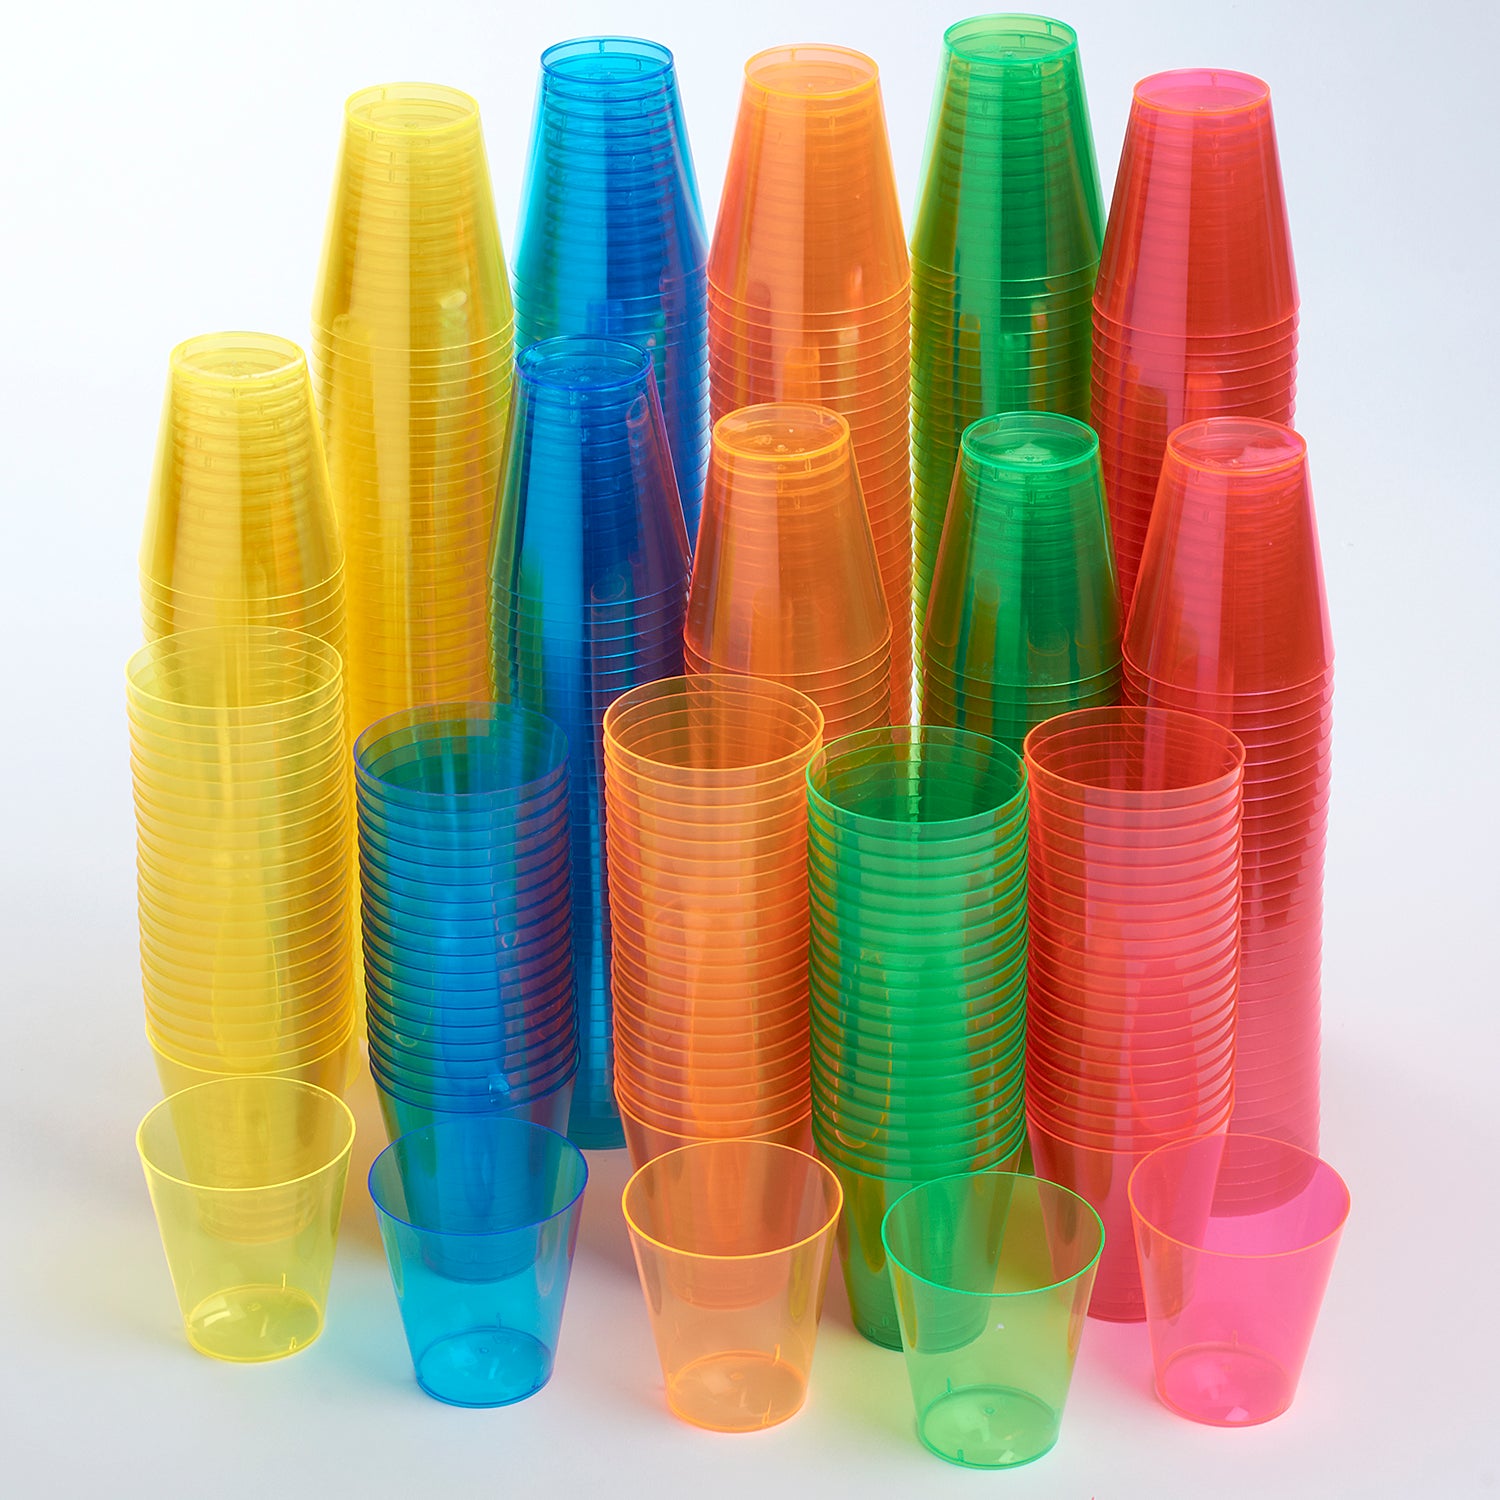 2 Oz. Neon Assorted Color Plastic Cups - 60 Ct.